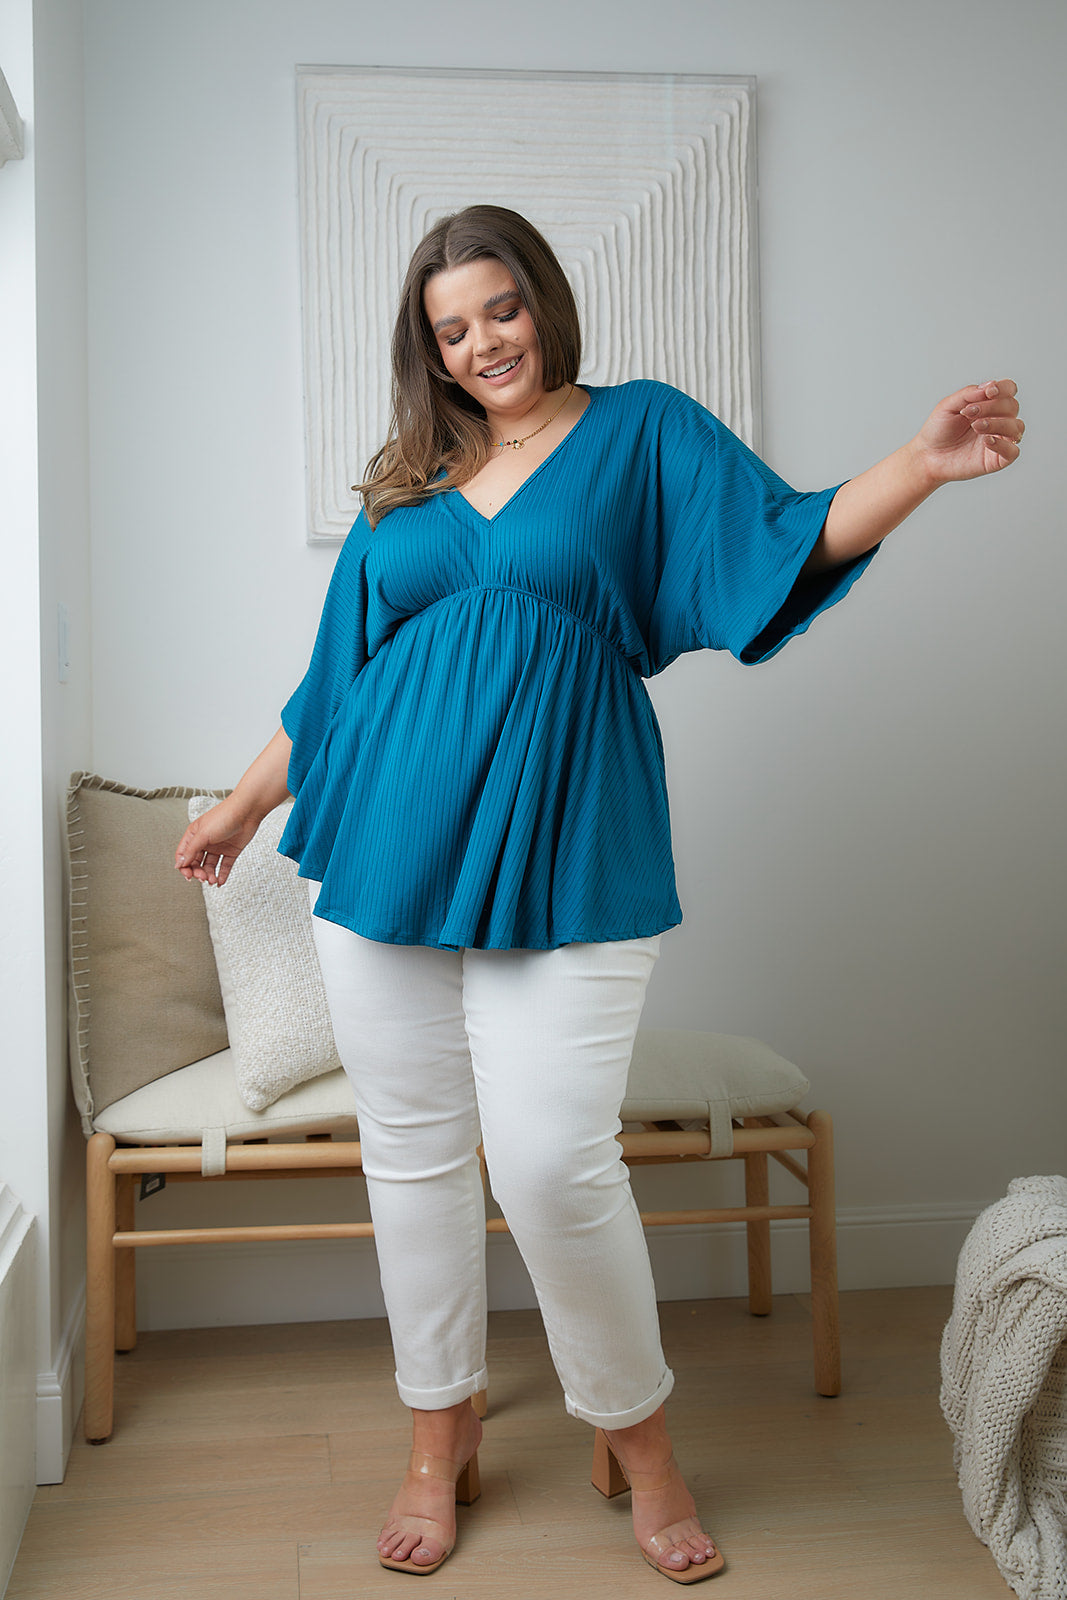 Storied Moments Draped Peplum Top in Teal